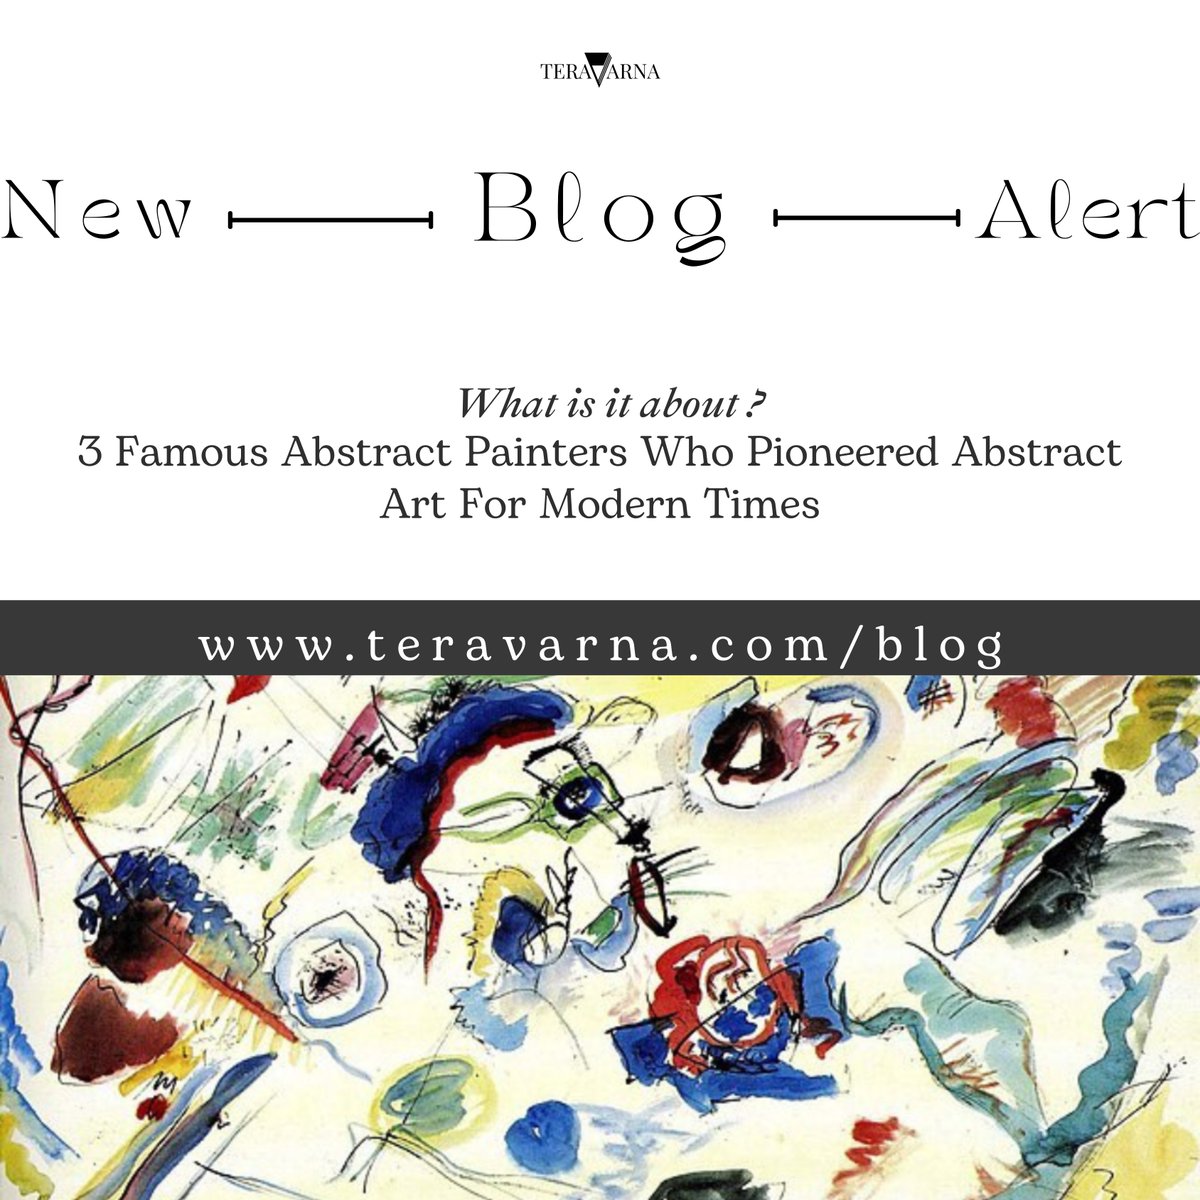 The Triumvirate of Abstract Expressionism🎨
Blog: 3 Most Famous Abstract Painters in the History of Art

teravarna.com/post/3-most-fa…
.
.
.
.
.
blogs, art blogs, art tips, artist insights, art info, abstract art
#teravarnagallery #teravarnablogs #teravarna_official #abstractart